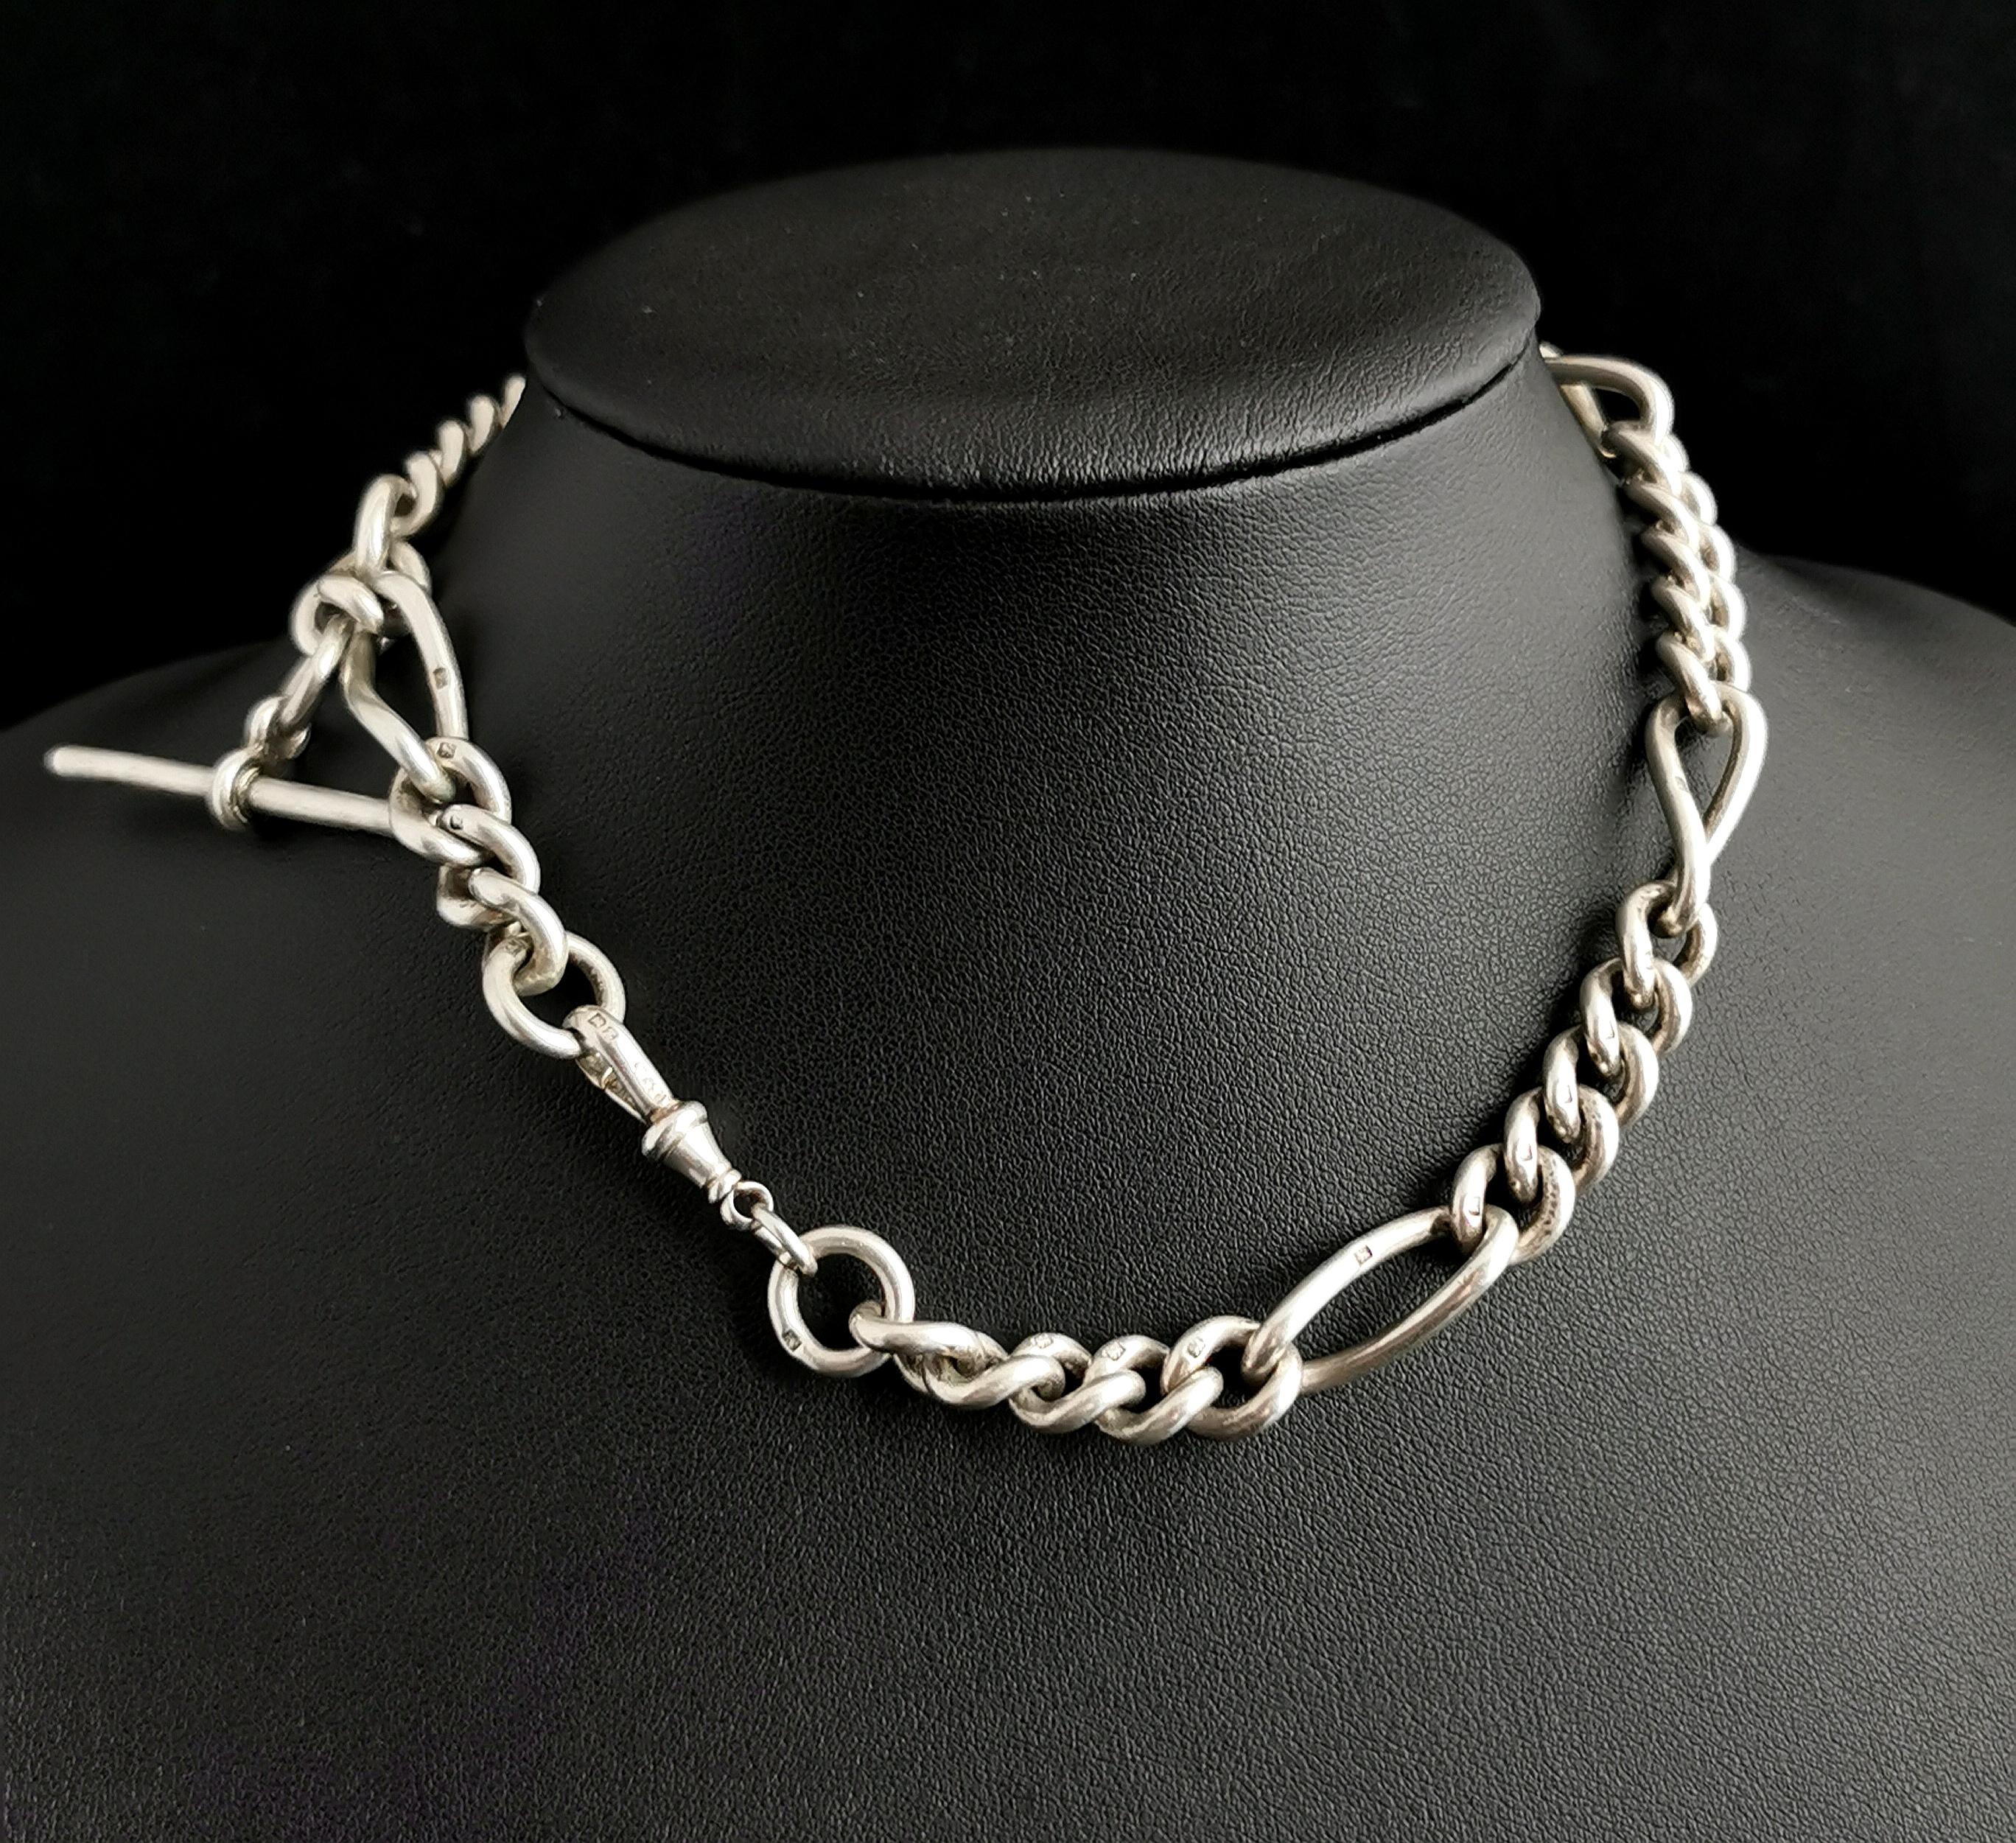 An attractive antique Victorian silver Albert chain.

Nice chunky fetter links with a figaro style design and a dog clip fastener to one end.

It has a silver t bar affixed to one side.

The chain is made from sterling silver and each link is